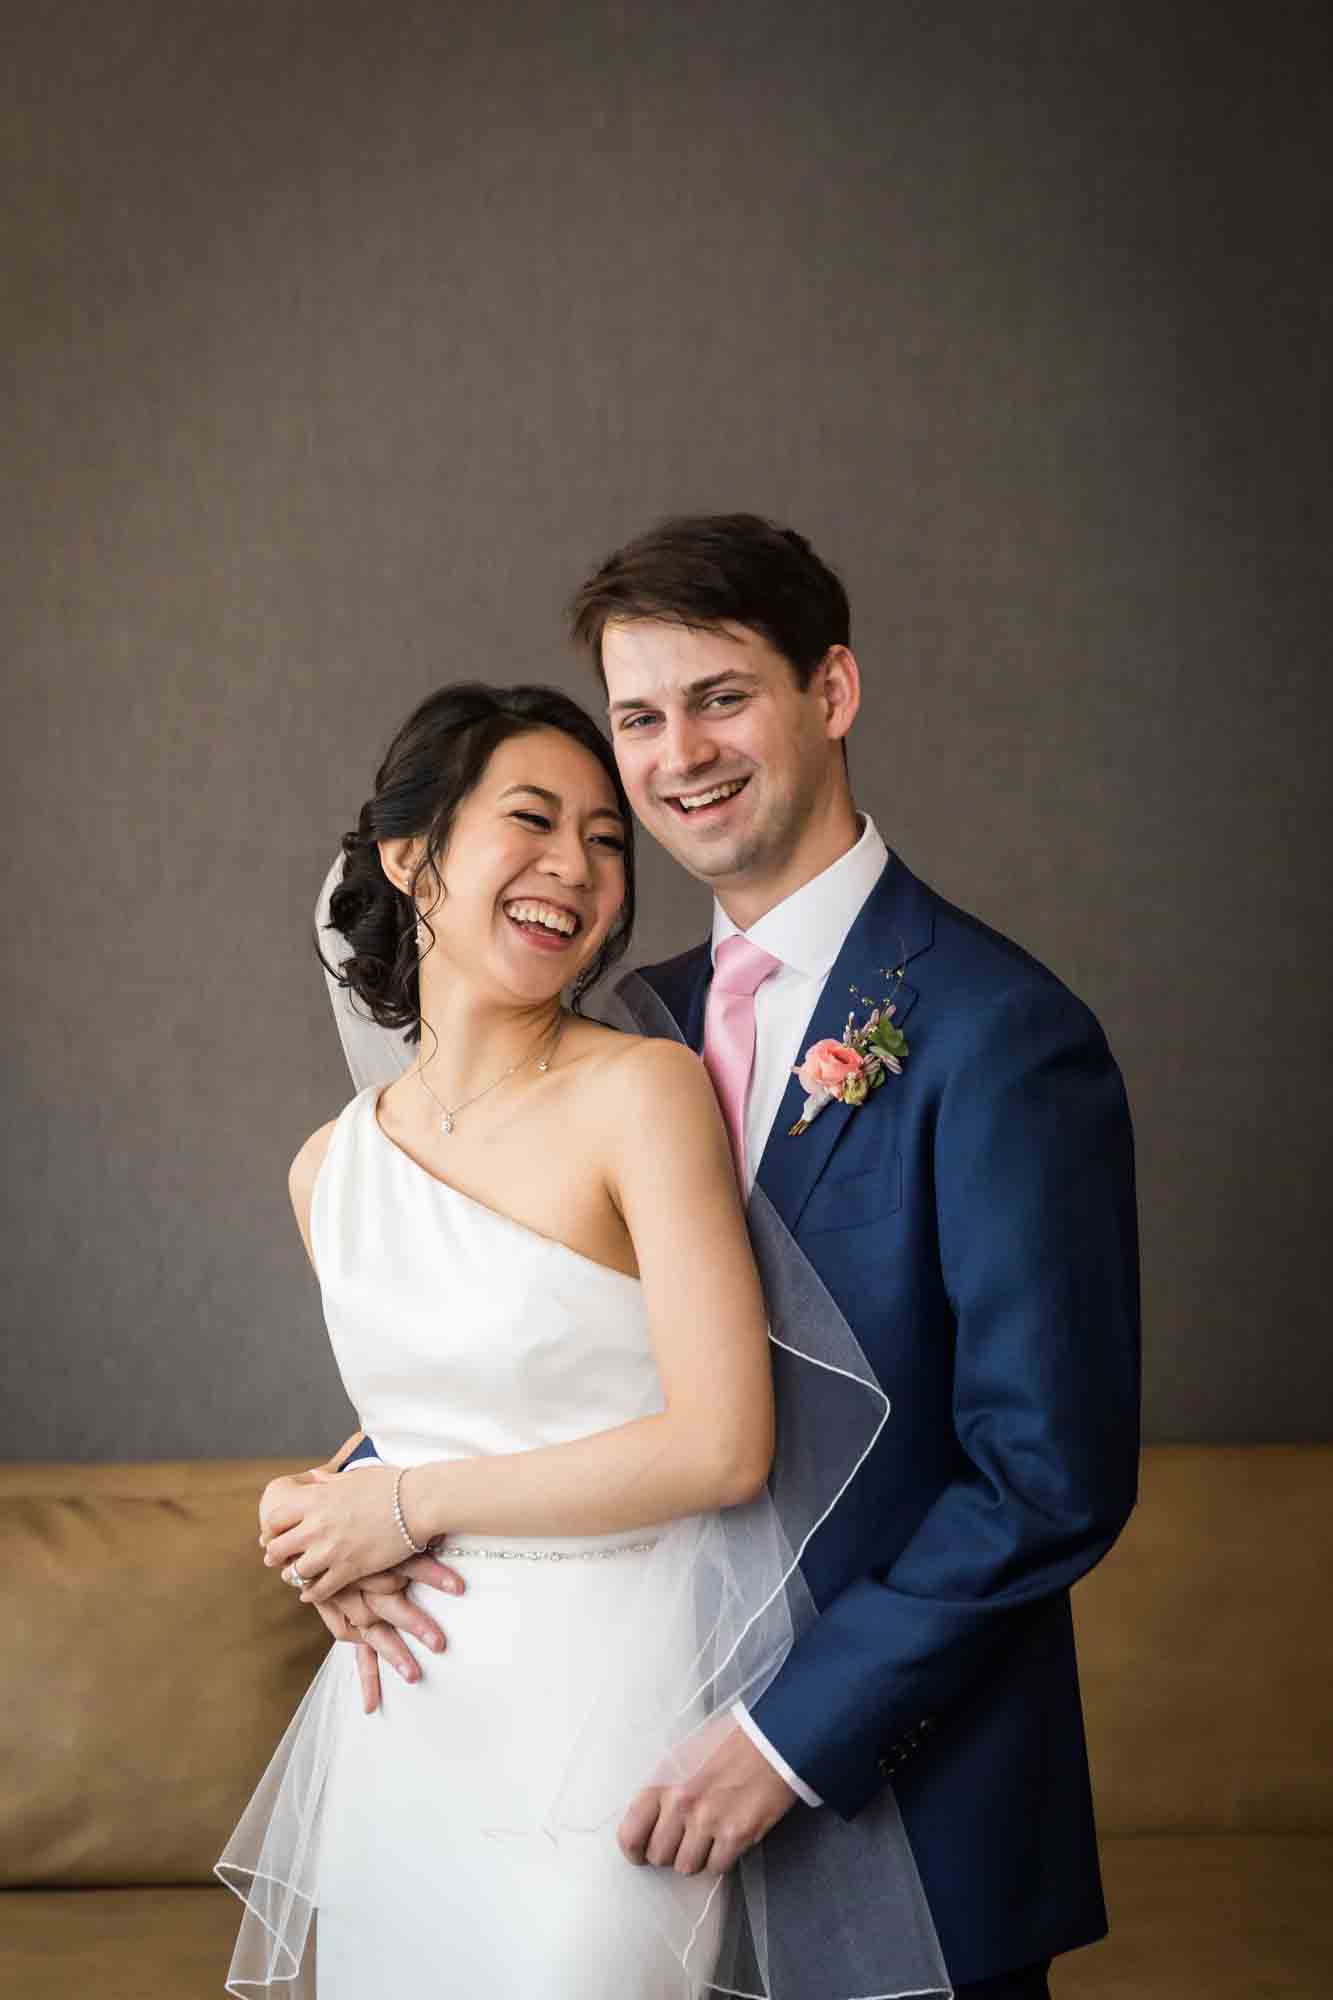 Bride and groom posed in front of couch